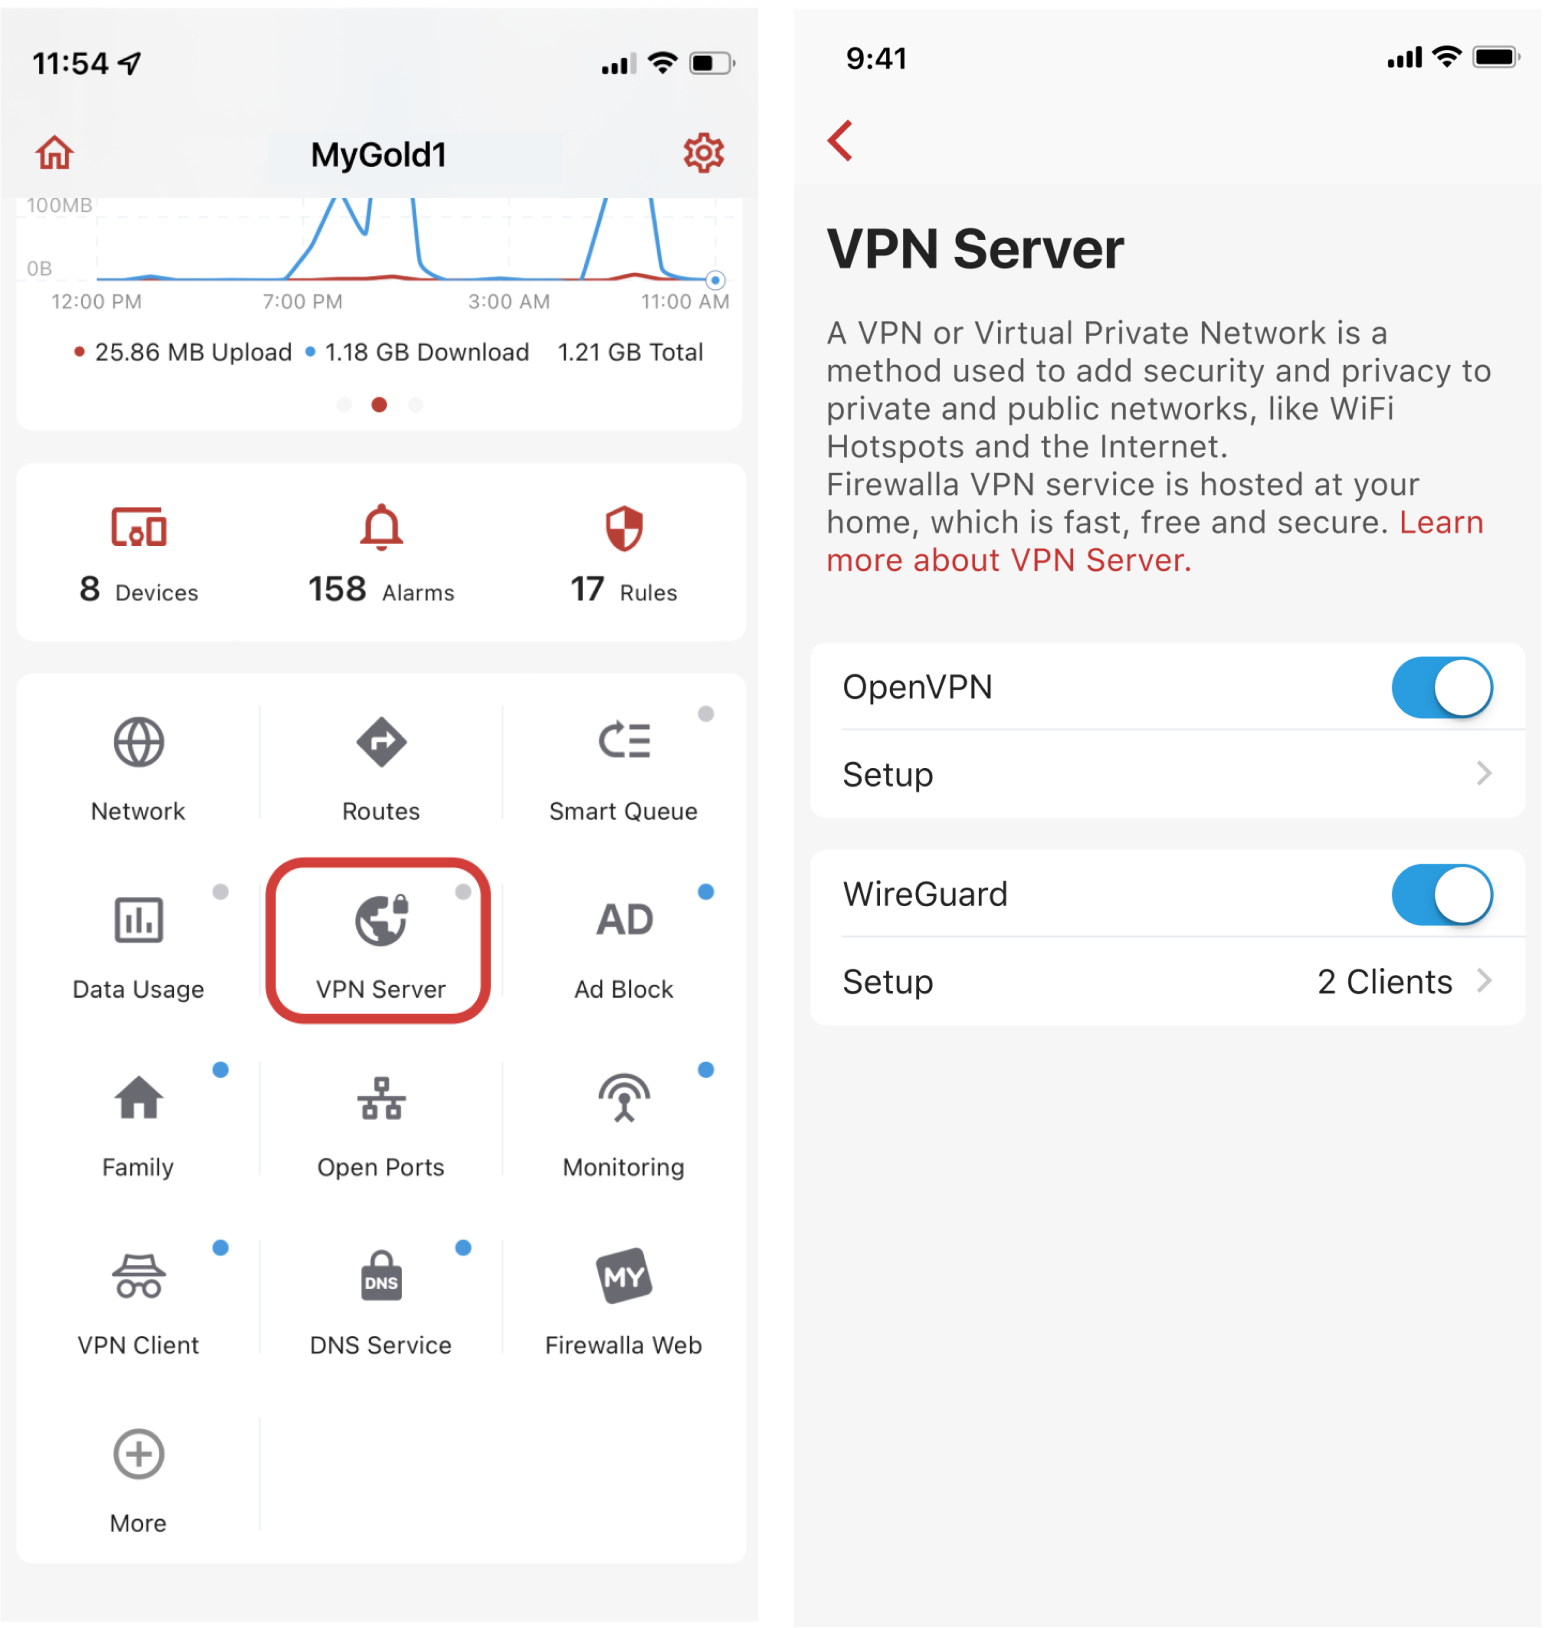 Site to Site Firewalla in-app demo – Turn on OpenVPN or WireGuard server